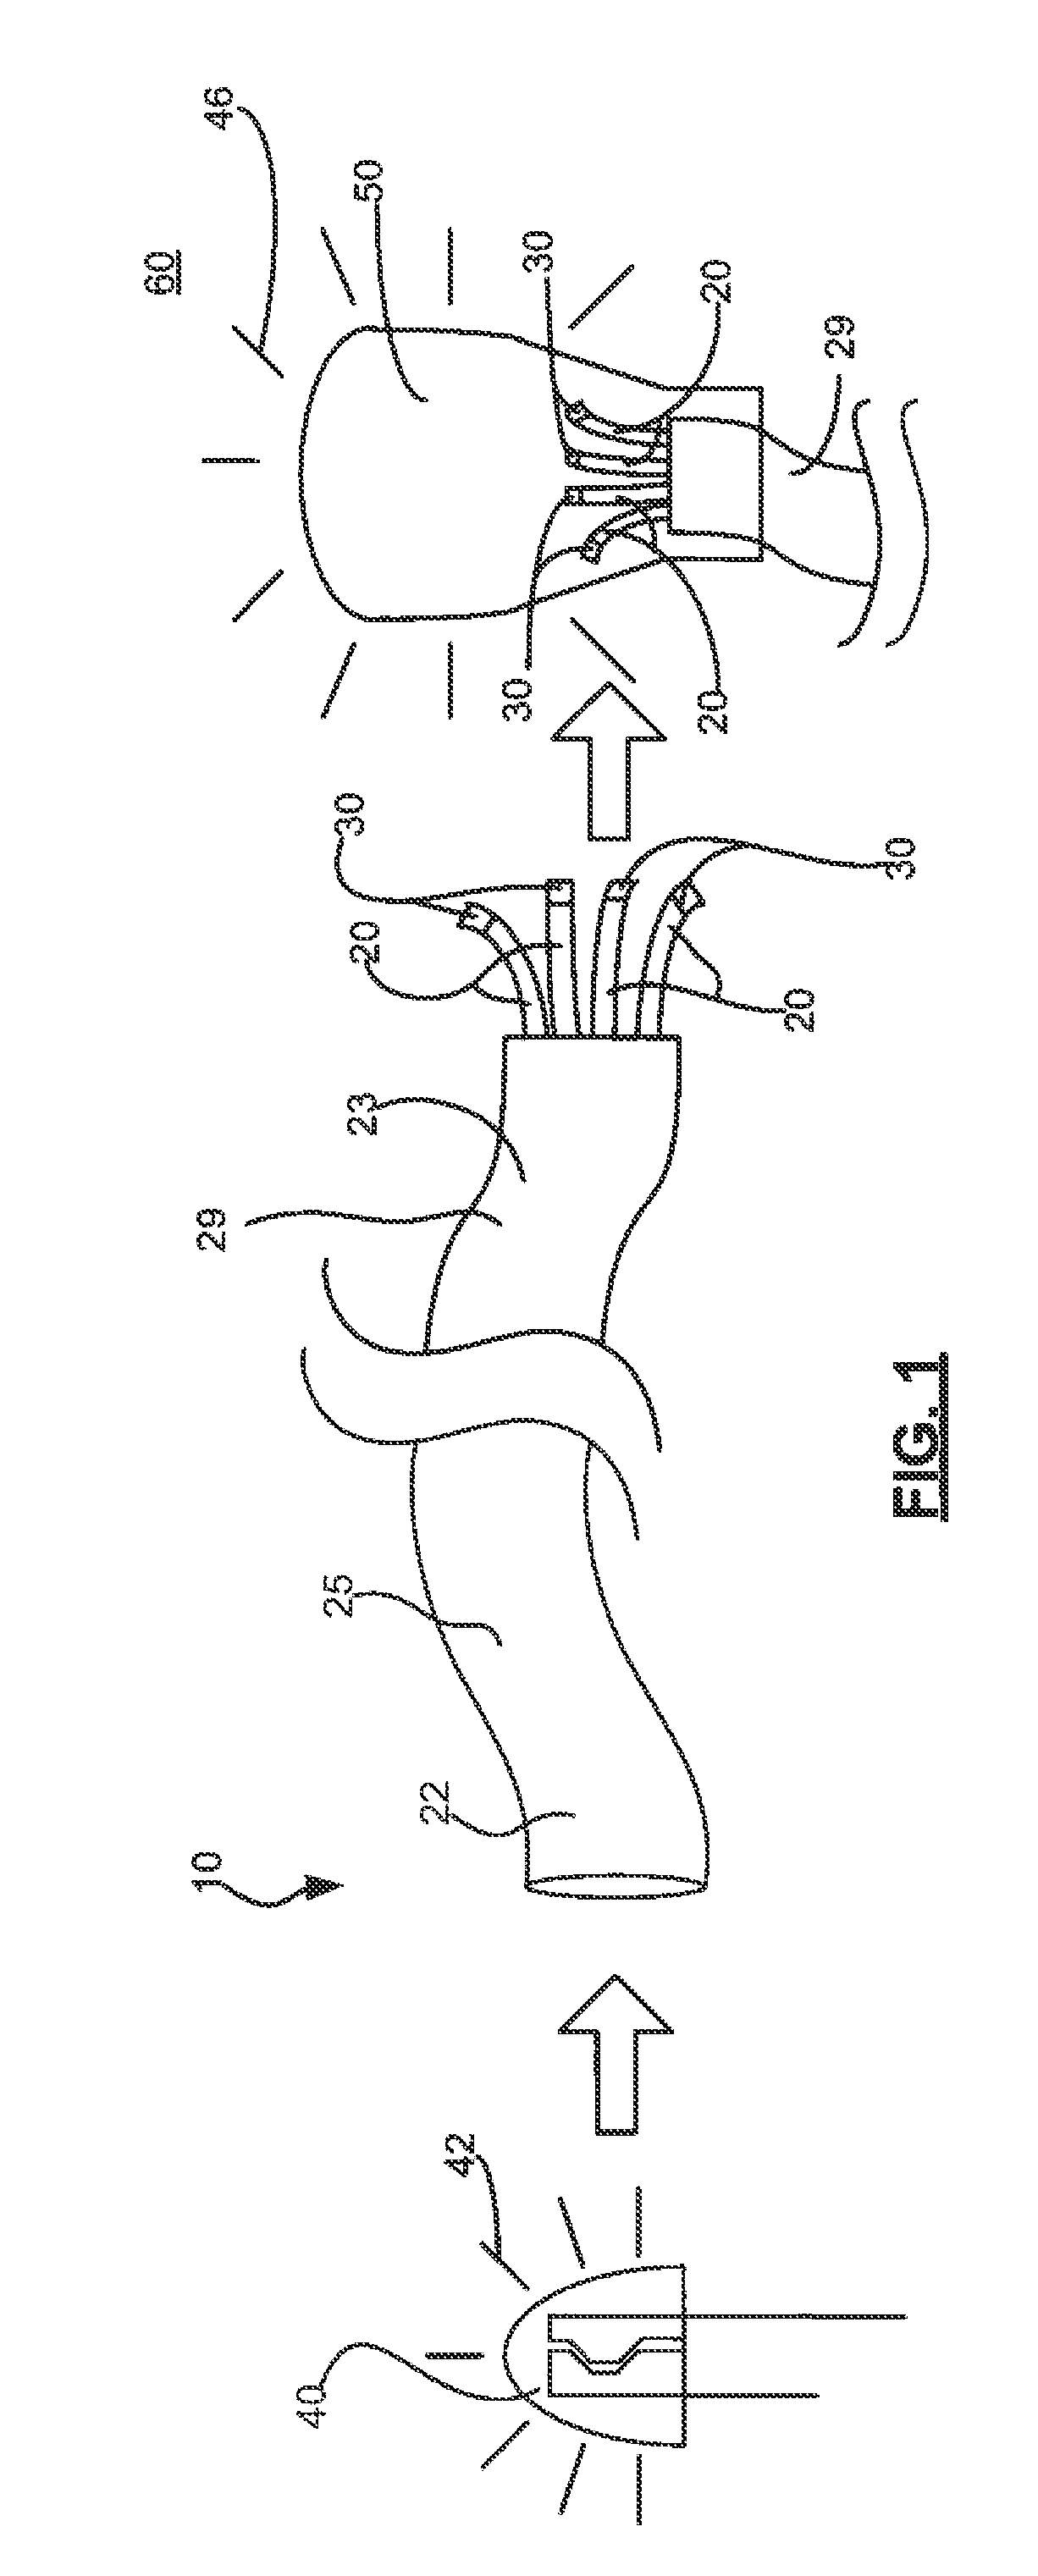 Remote light wavelength conversion device and associated methods